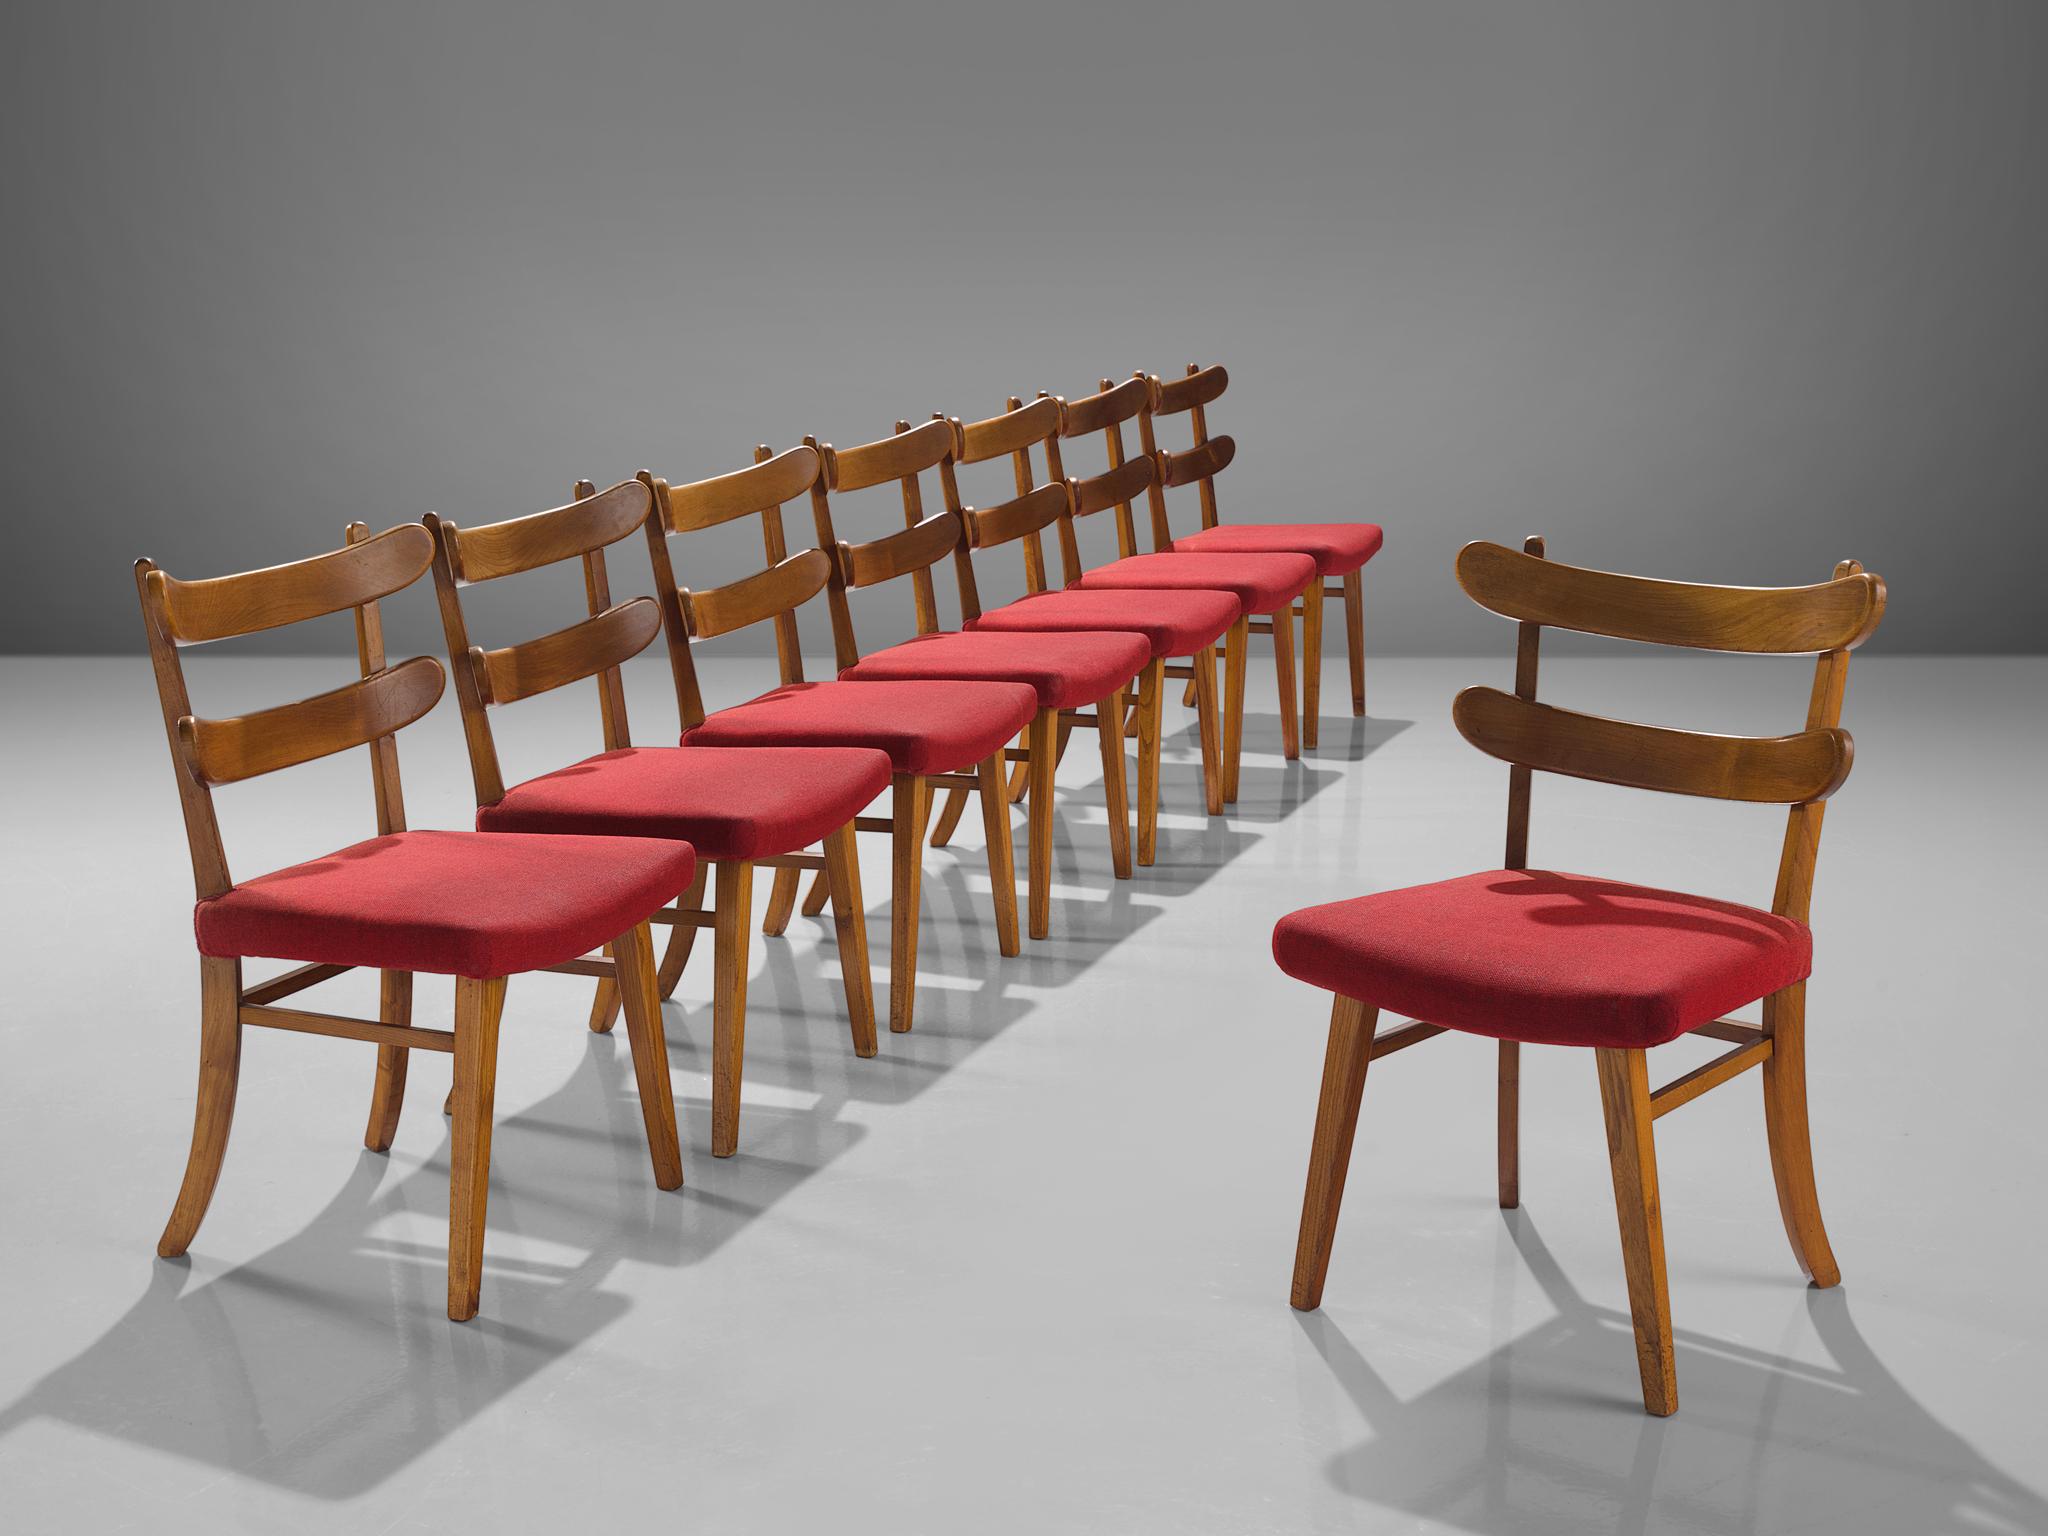 Set of eight dining chairs, elm, wool, Denmark, 1960s 

This set of eight dining chairs in elm features an upholstered red seat in wool. One distinctive trait of this Danish set are the thick curved elm slats that make the back of this chair. The